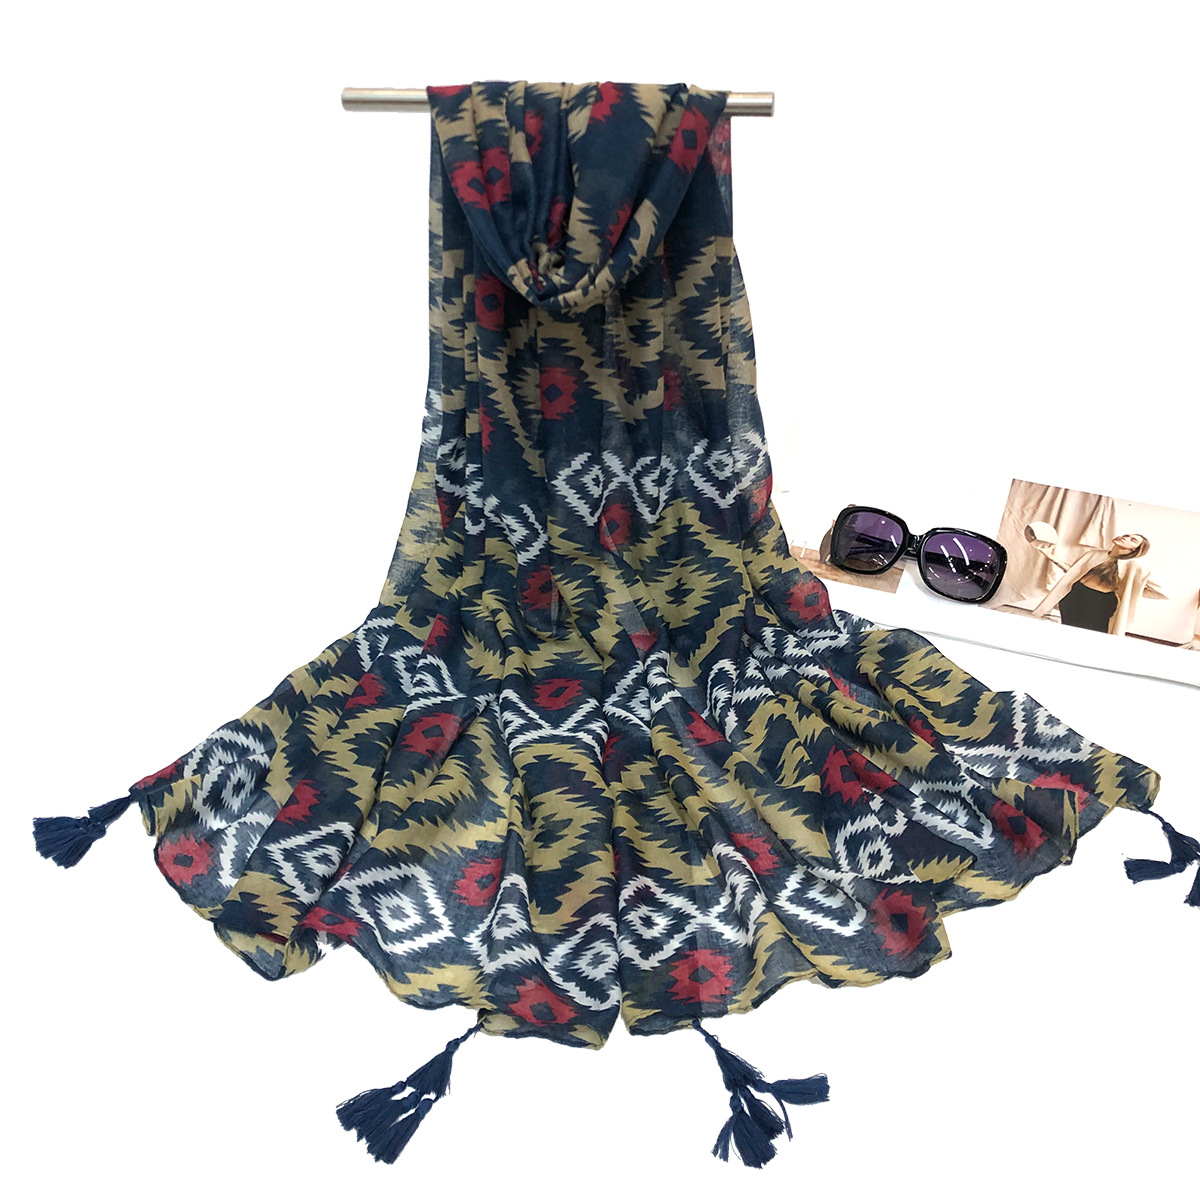 New European and American Export Spring and Summer Fashion Printing Tassel Scarf Shawl Exclusive for Cross-Border Factory Supply